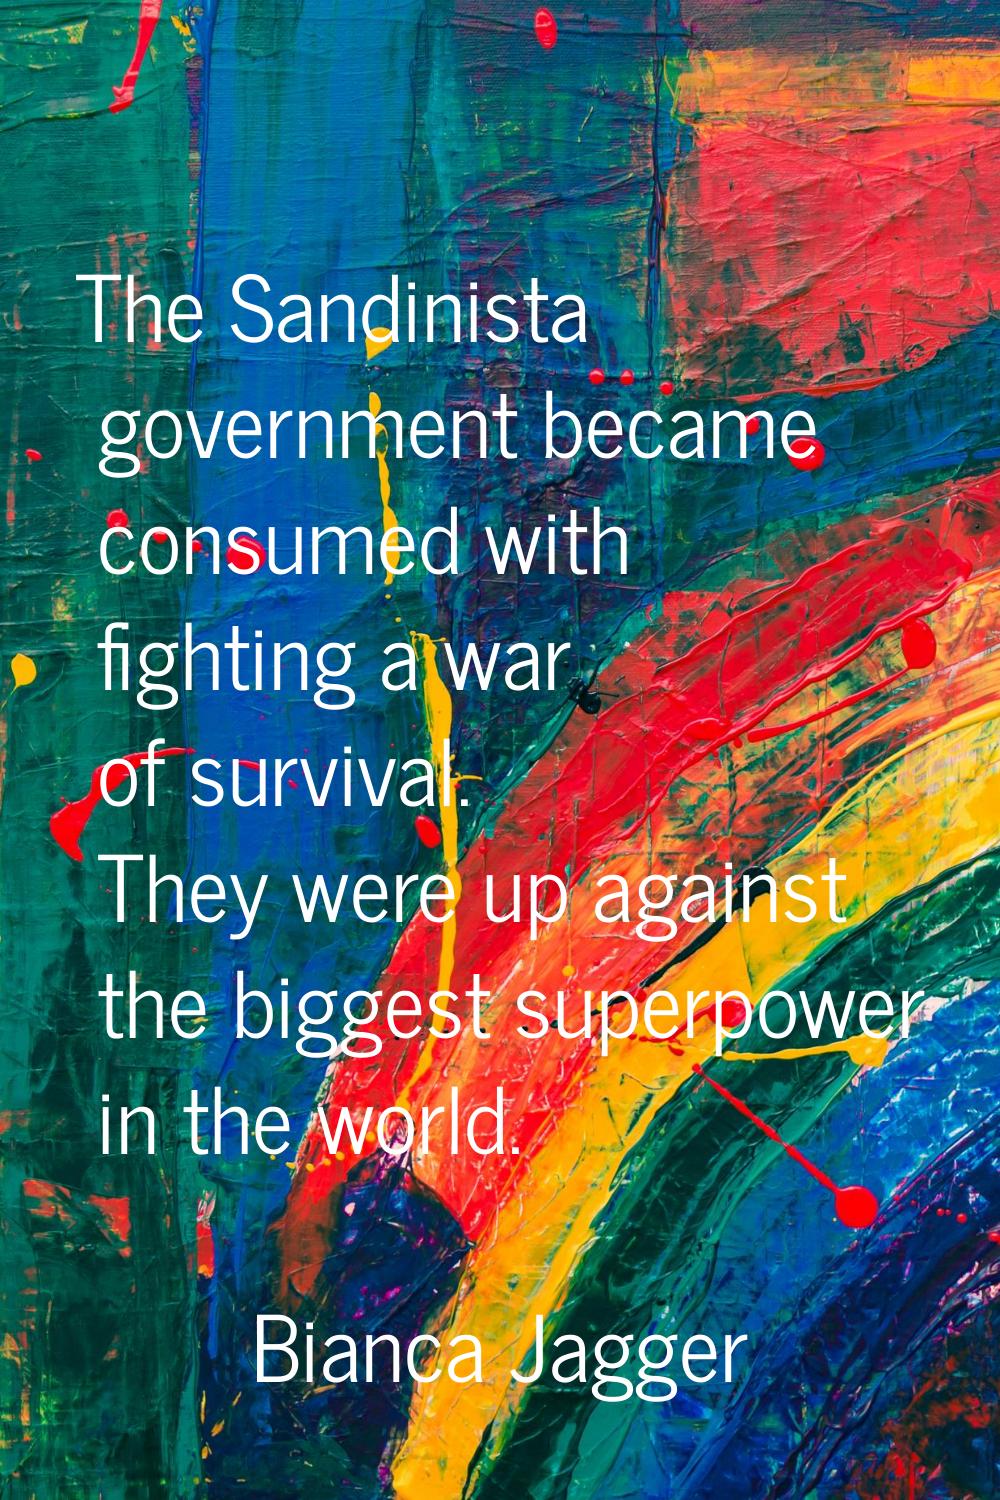 The Sandinista government became consumed with fighting a war of survival. They were up against the